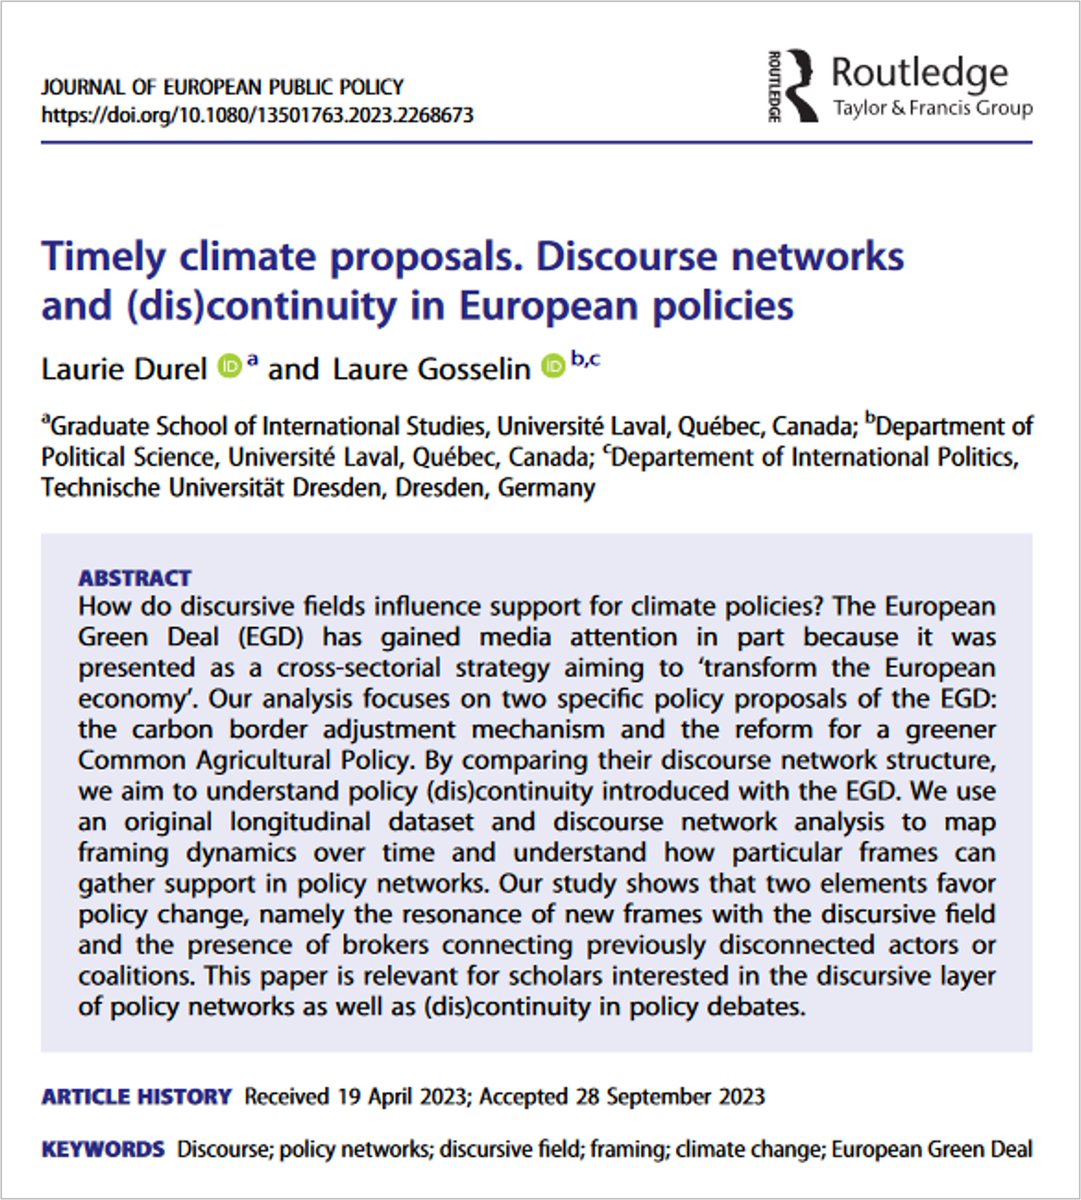 Many factors can affect the introduction of #ClimateChange #policies. In @jepp_journal, @DurelLaurie & @GosselinLaure report on their study of debates about the European Green Deal & show #InformationBrokers can be instrumental in advancing #PolicyChange doi.org/10.1080/135017…